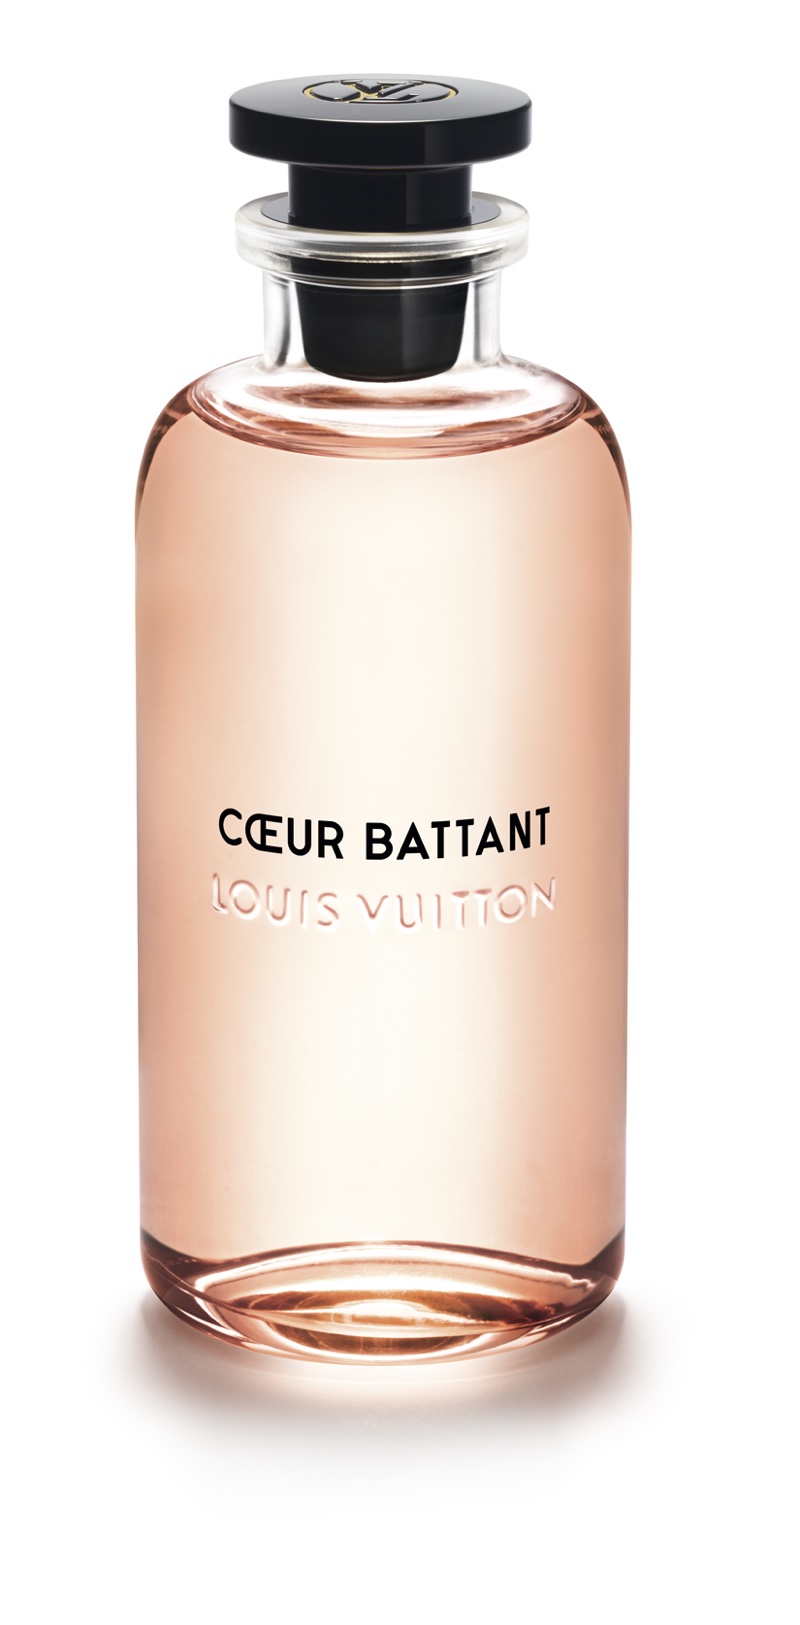 Louis Vuitton reveals campaign for new scent starring ambassador